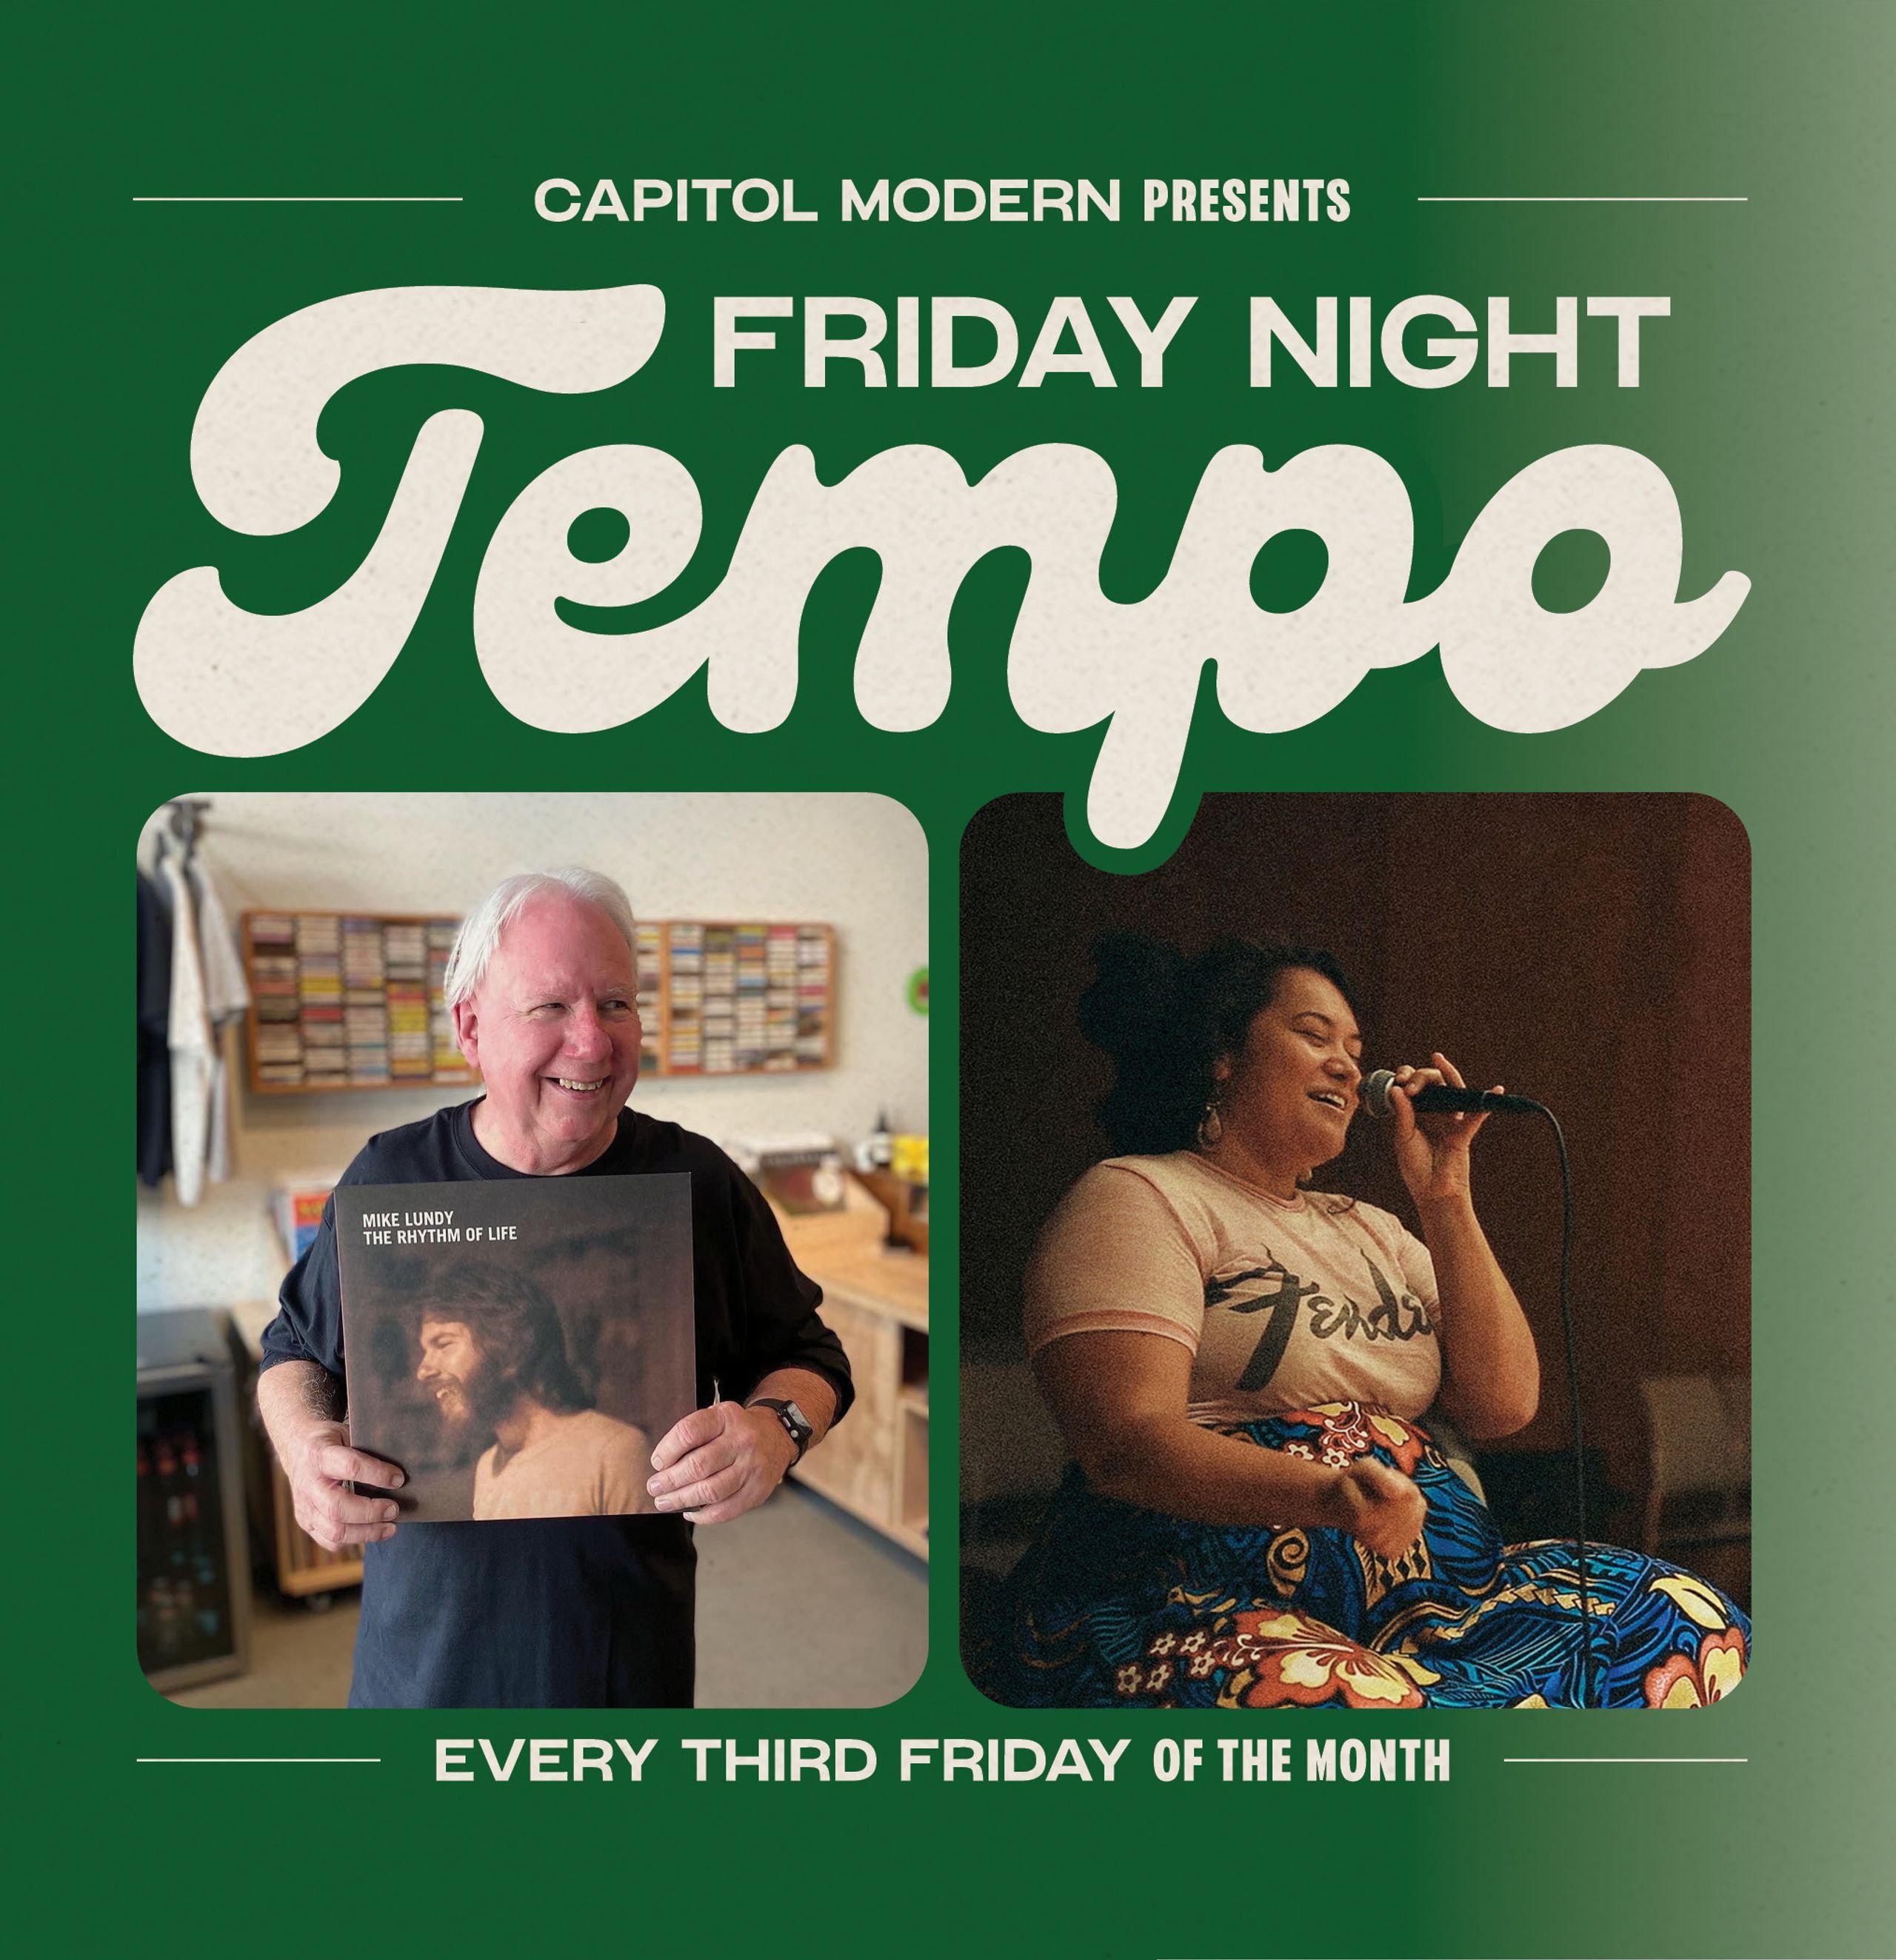 Friday Night Tempo. Every third friday of the month. Home Grown with Aloha Got Soul.